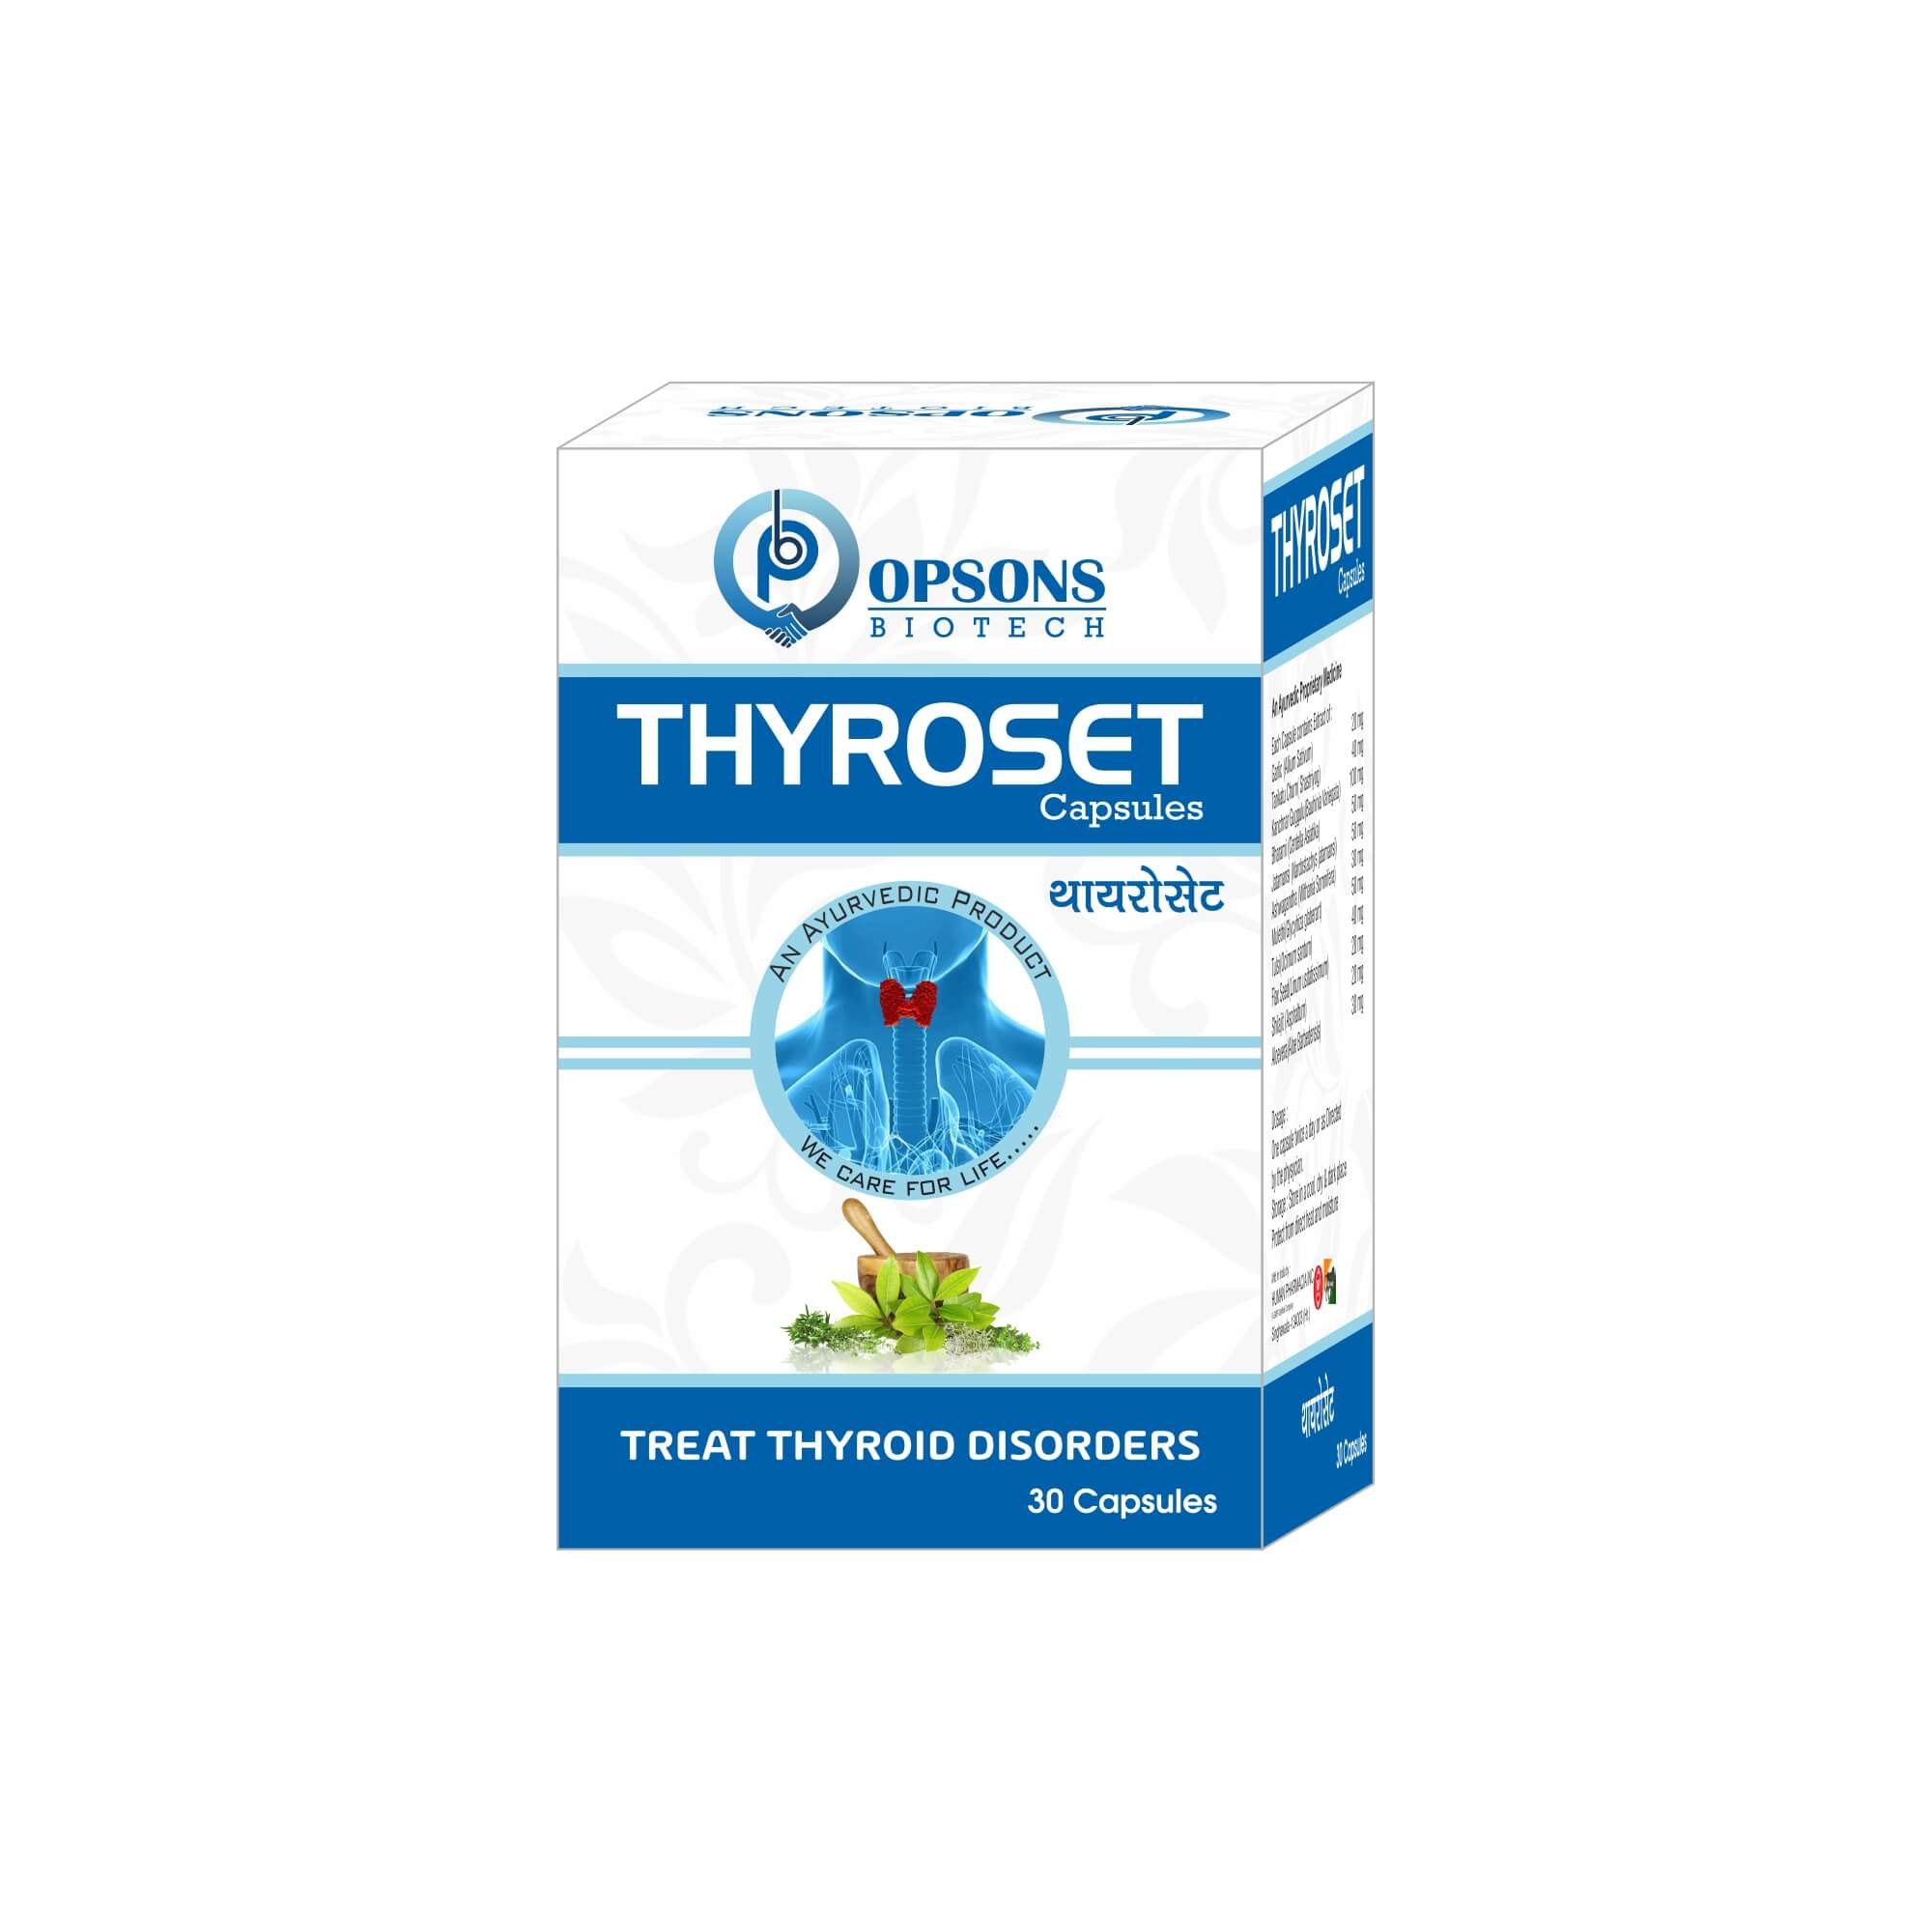 Product Name: Thyroset capsules, Compositions of Treat Thyroid Disorders are Treat Thyroid Disorders - Opsons Biotech